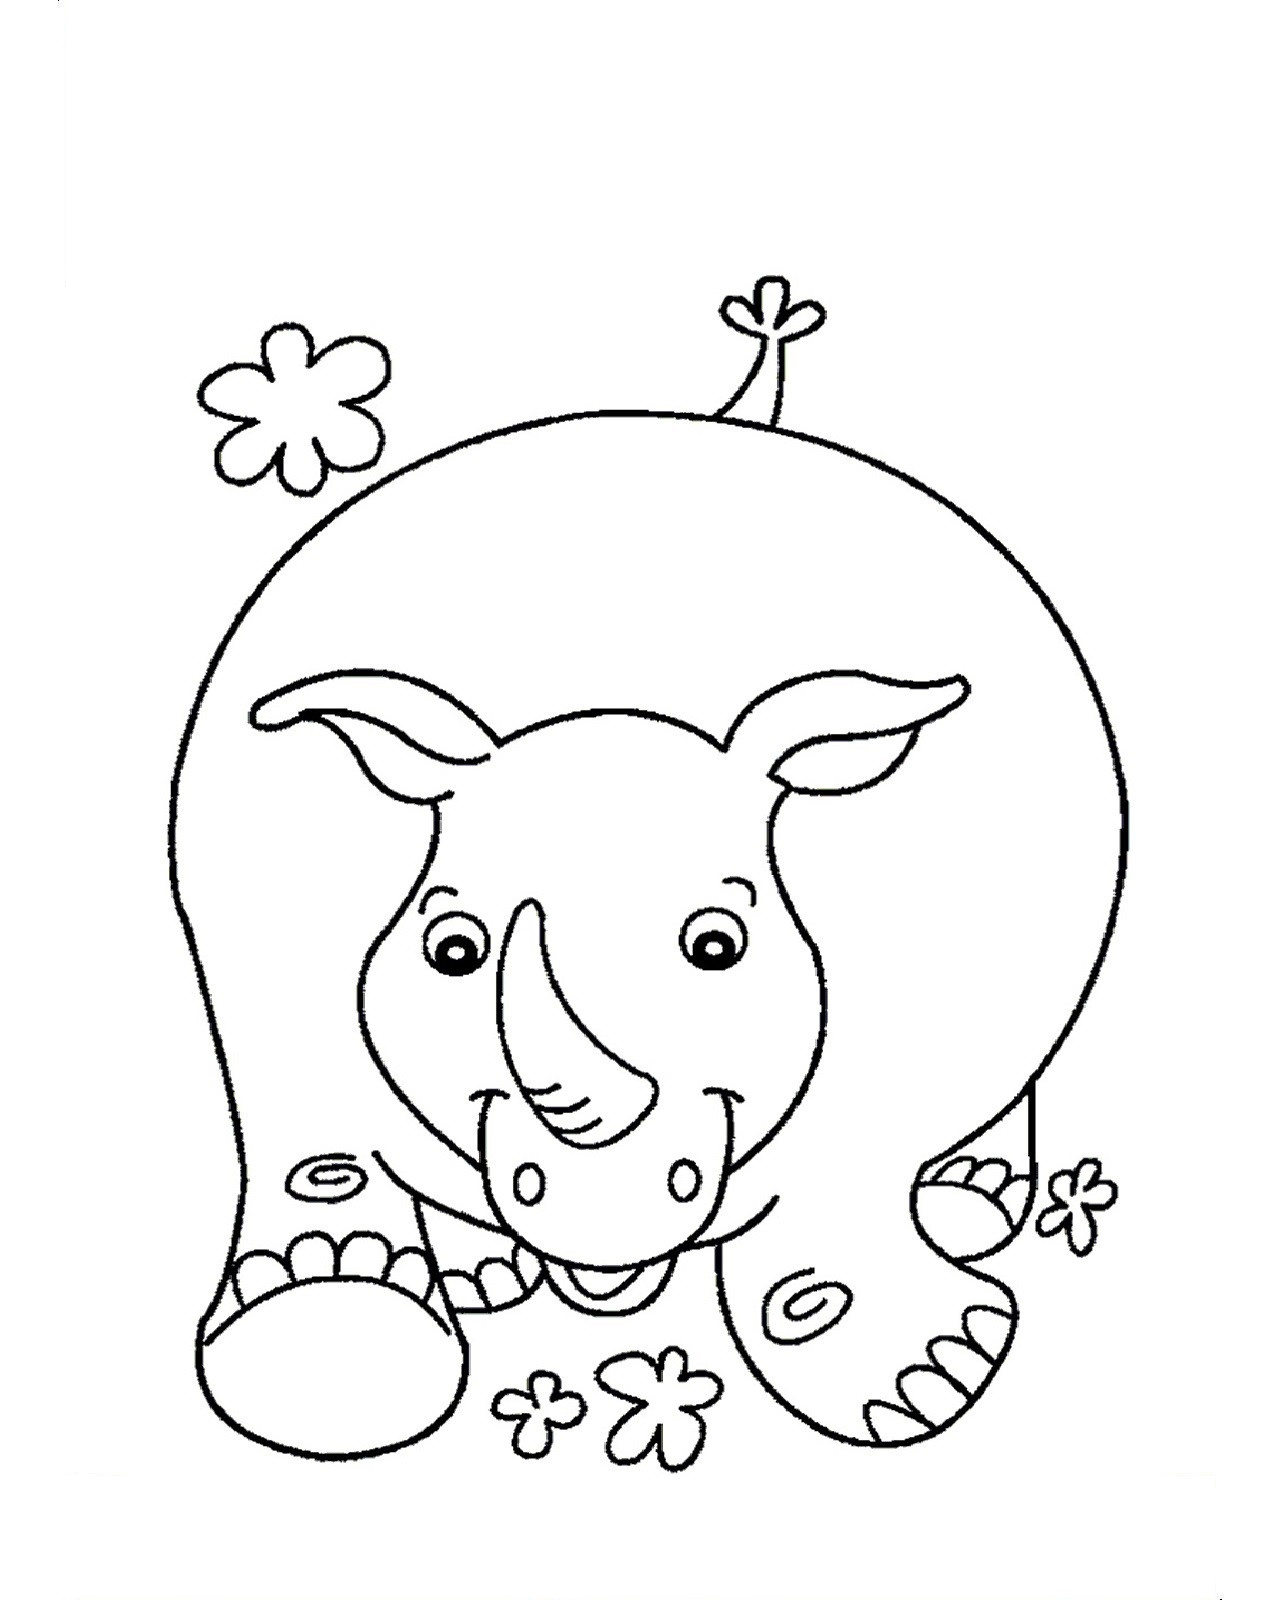 Free Toddler Coloring Pages
 Rhino Coloring Pages for child Preschool and Kindergarten